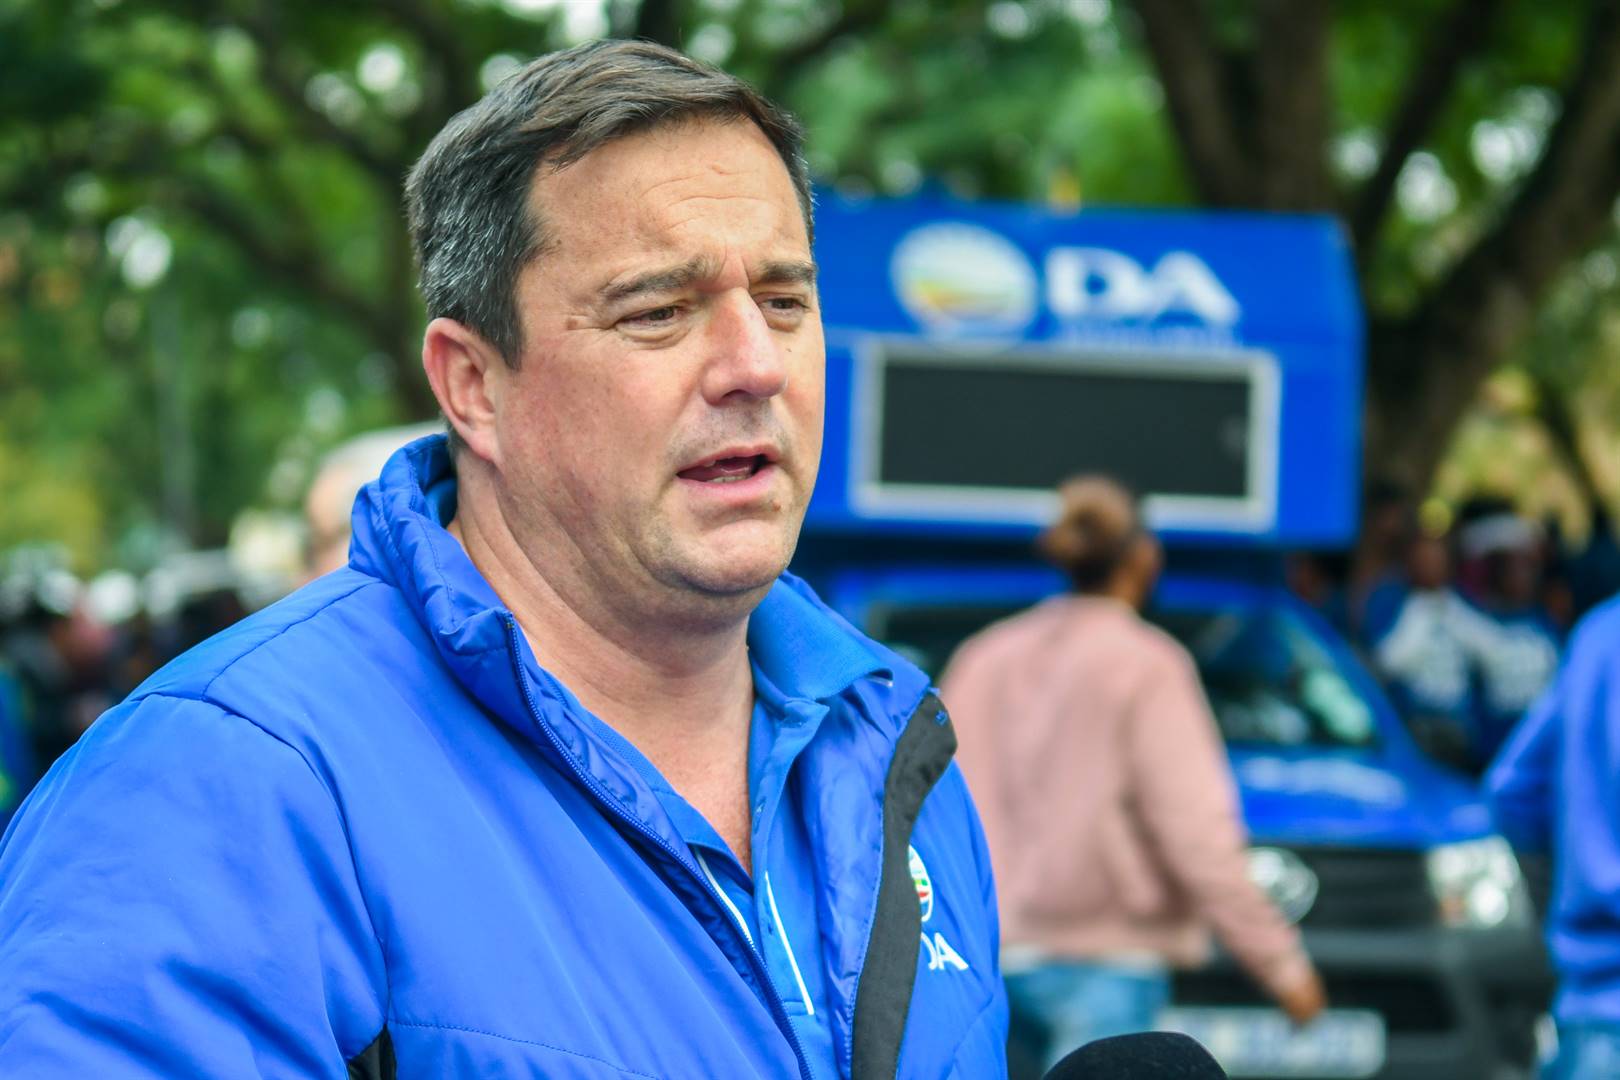 DA leader John Steenhuisen said the quotas could cost more than 600 000 jobs. Photo by Gallo Images